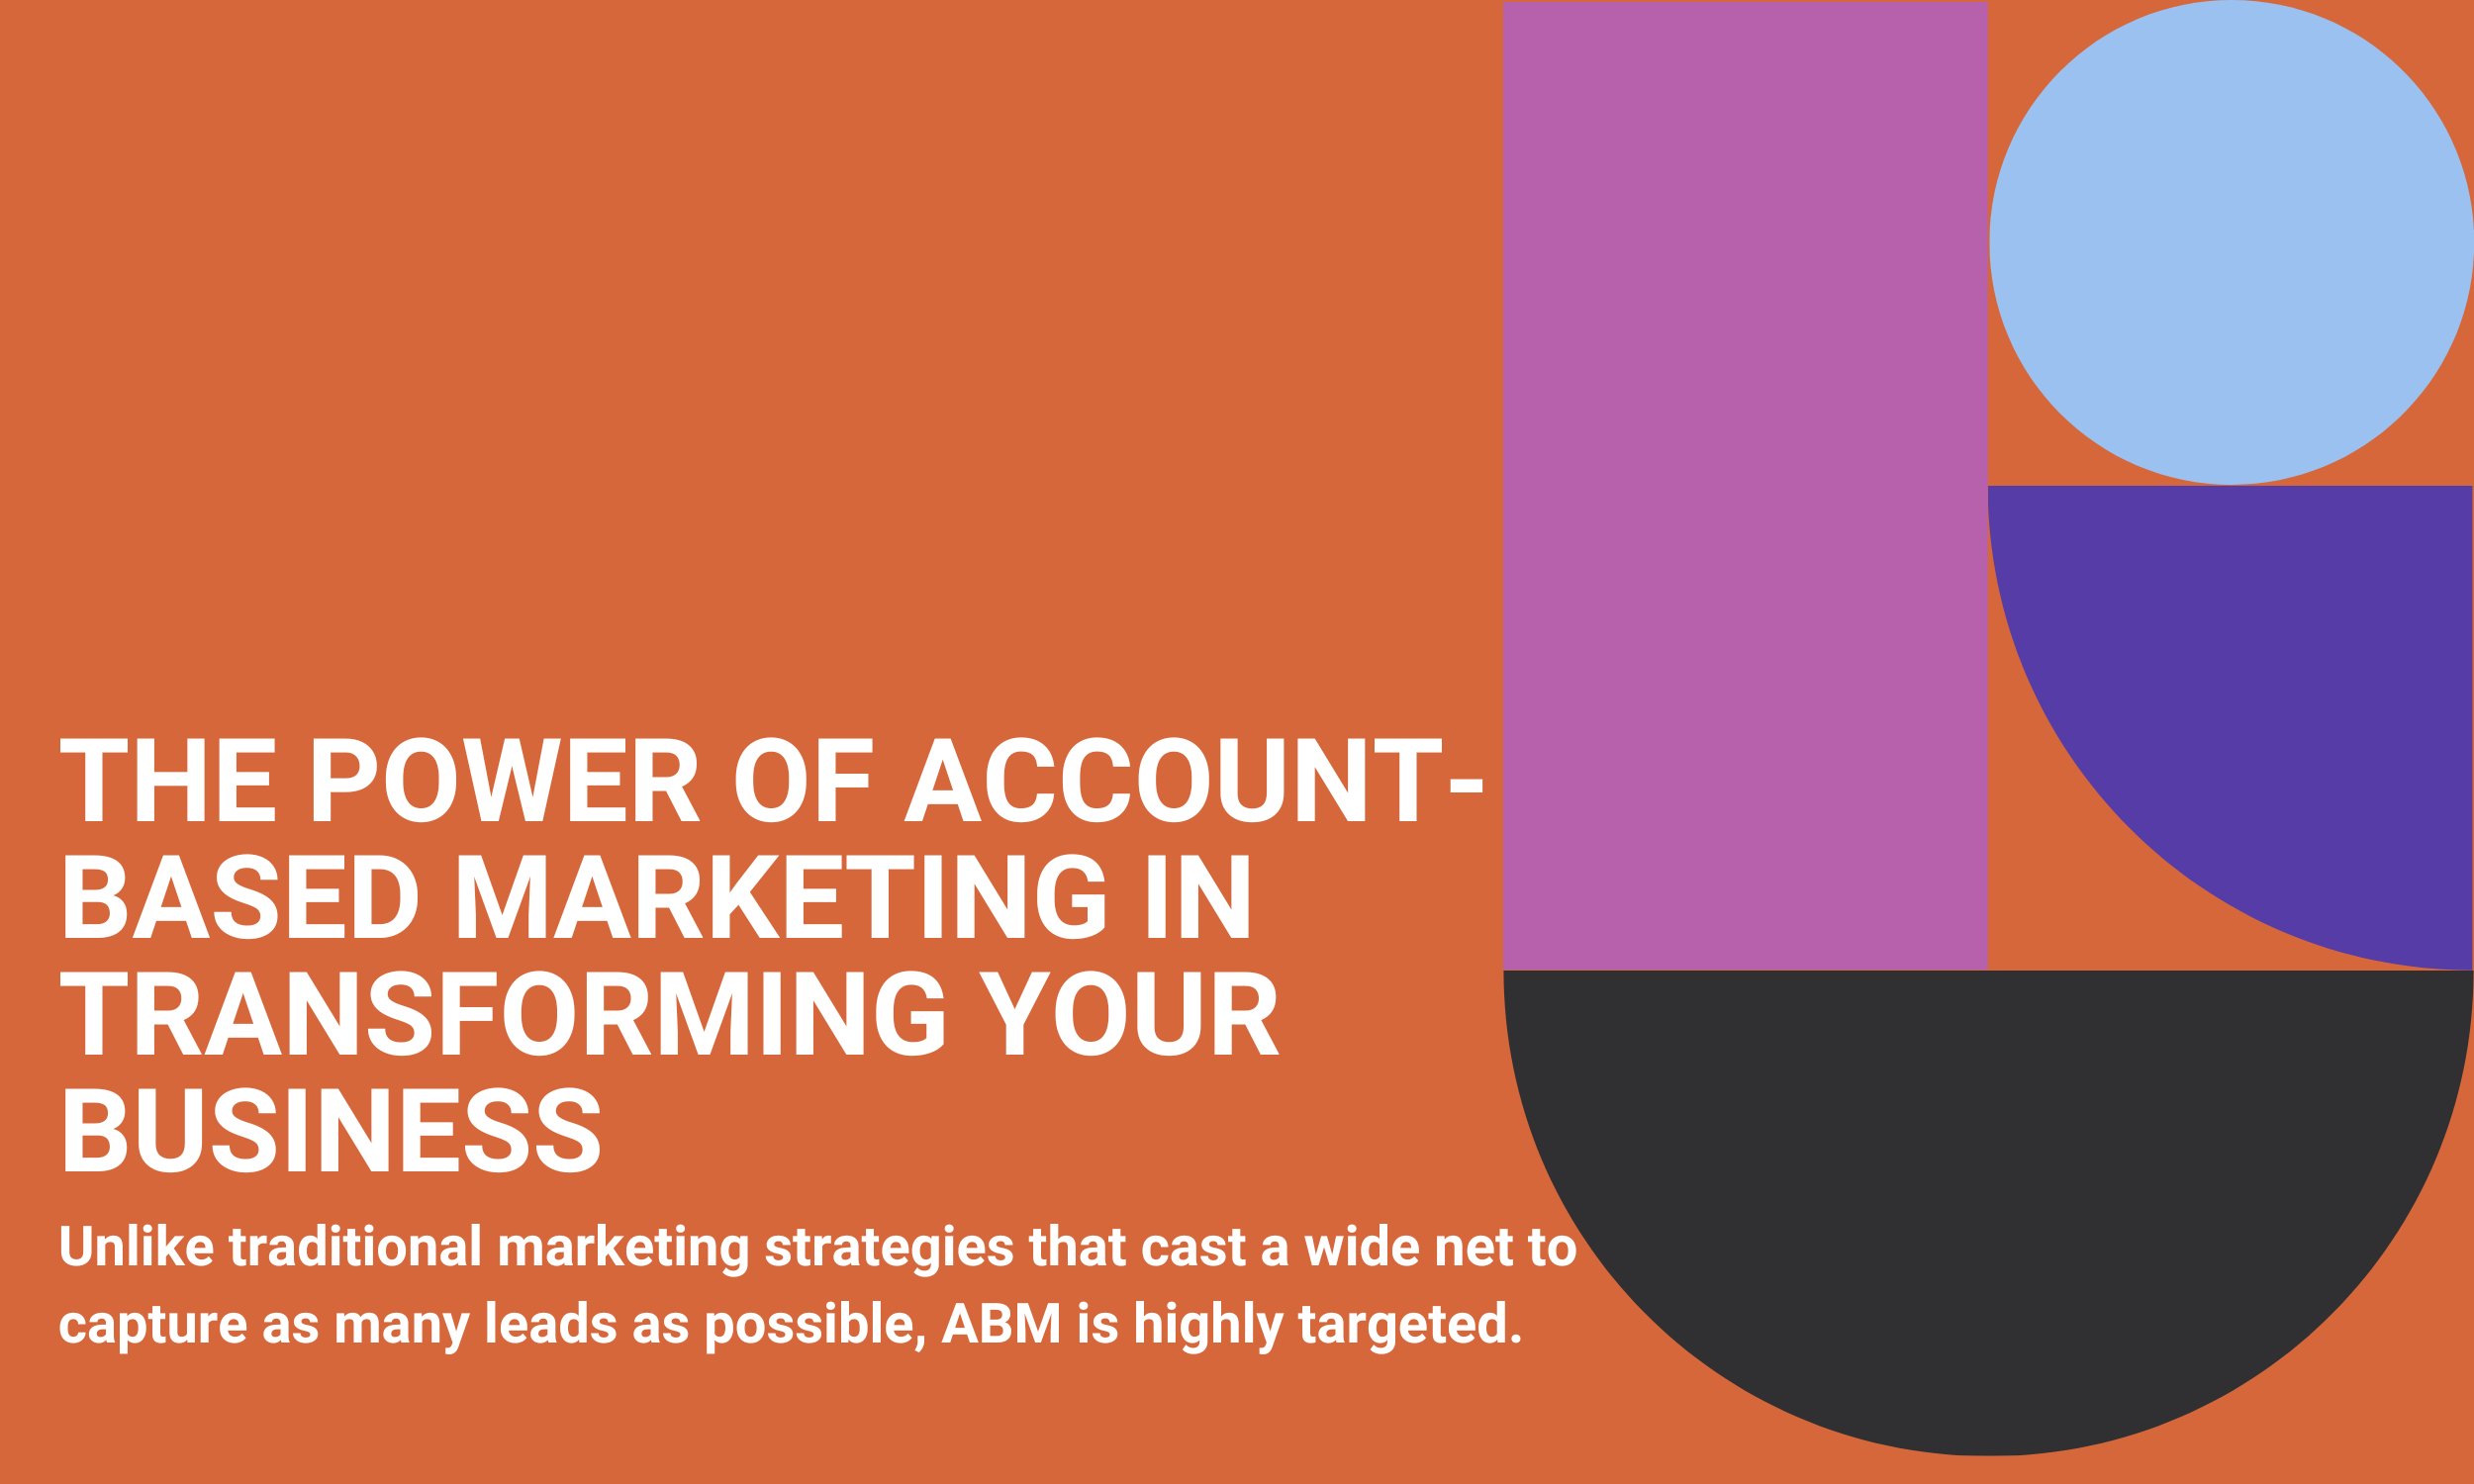 The Power of Account-Based Marketing in Transforming Your Business